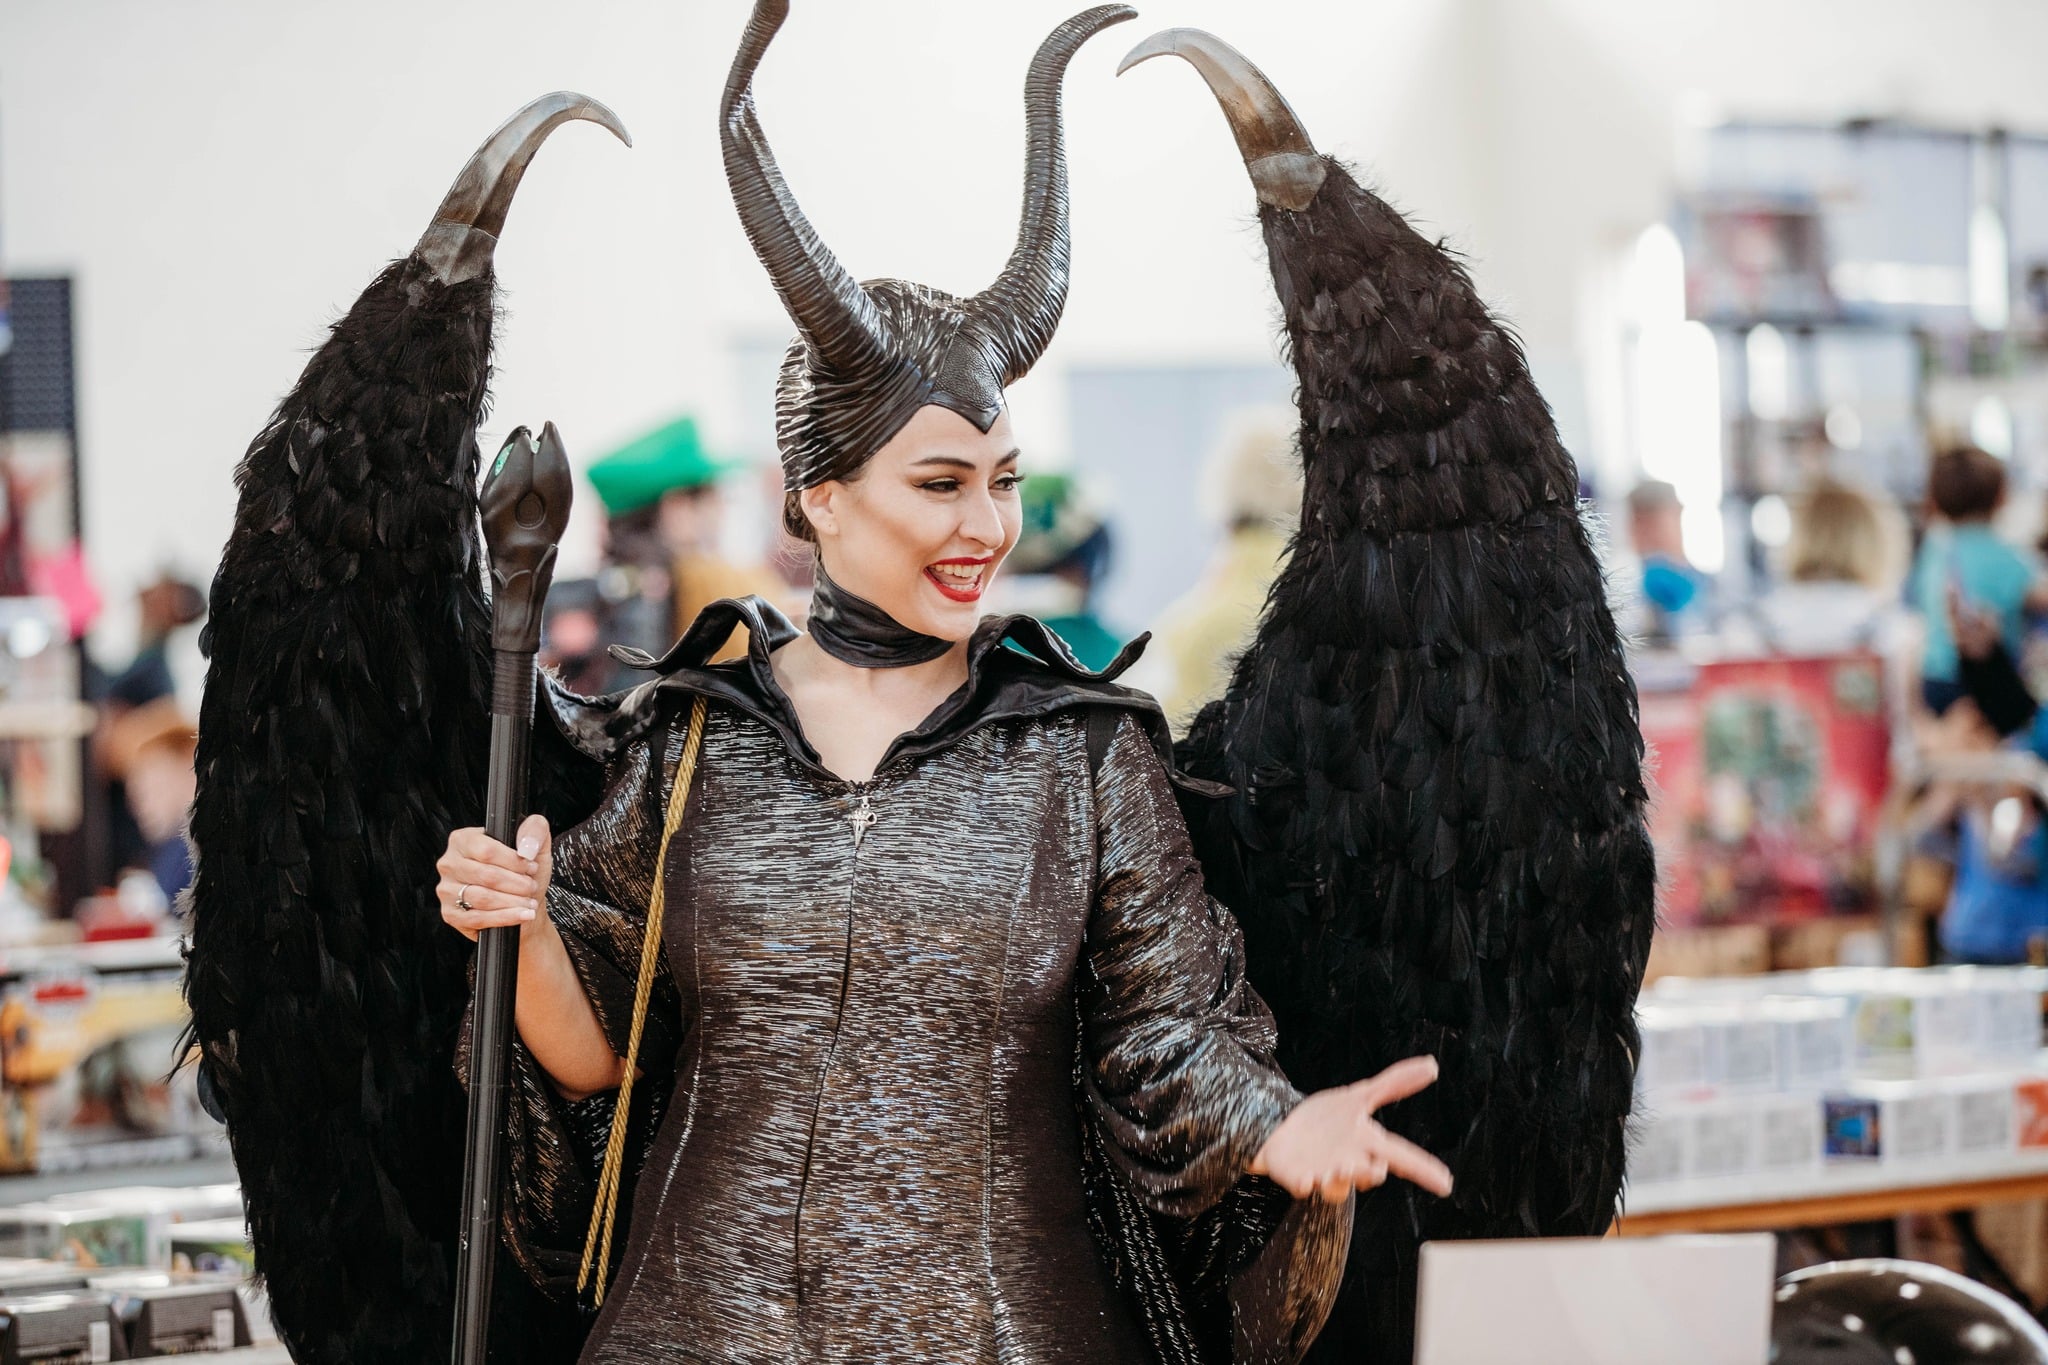 Nerd Con woman dressed as Maleficent